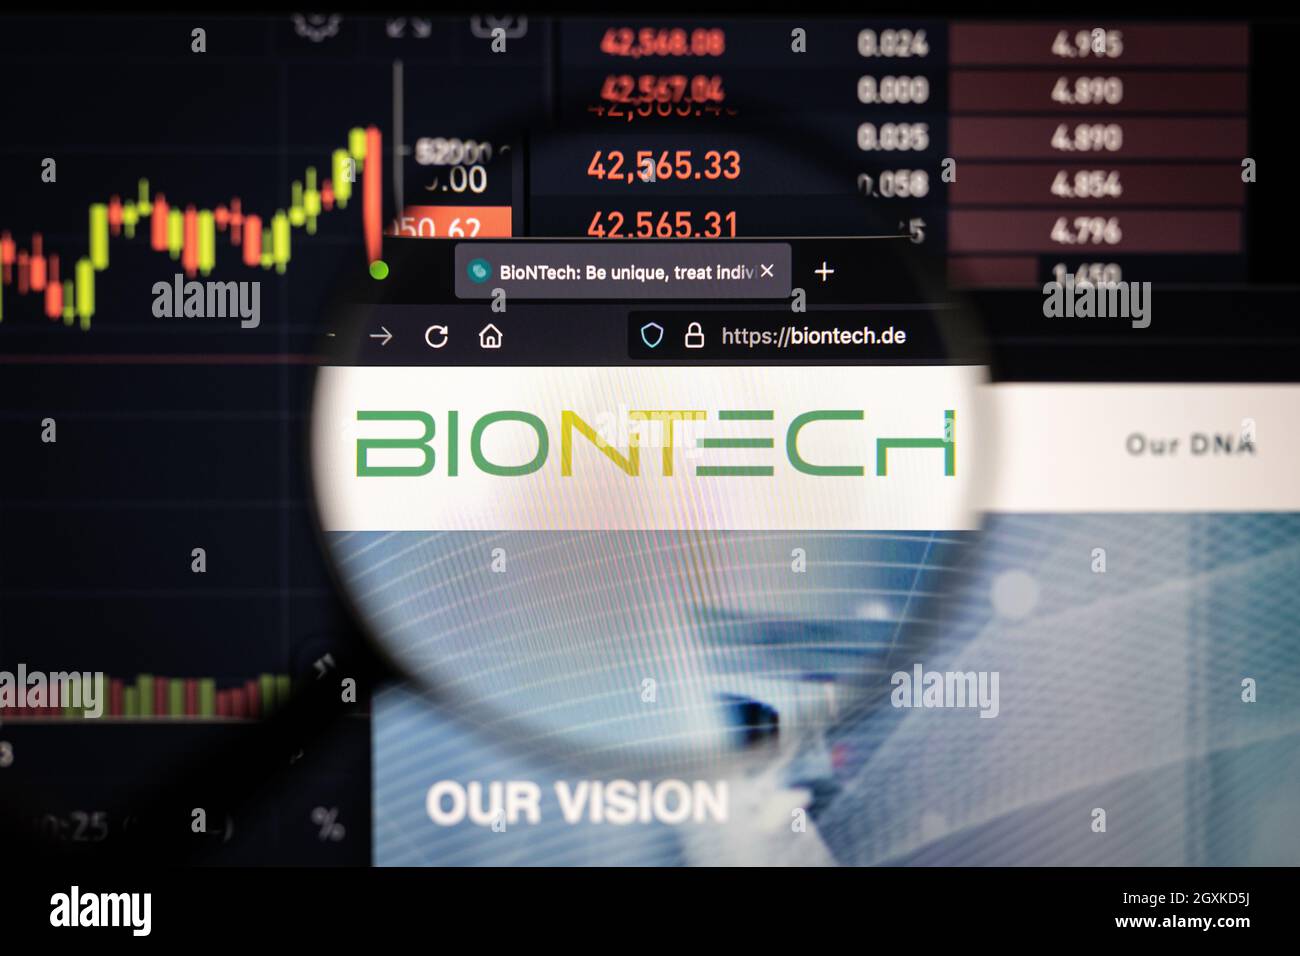 Biontech company logo on a website with blurry stock market developments in the background, seen on a computer screen through a magnifying glass Stock Photo